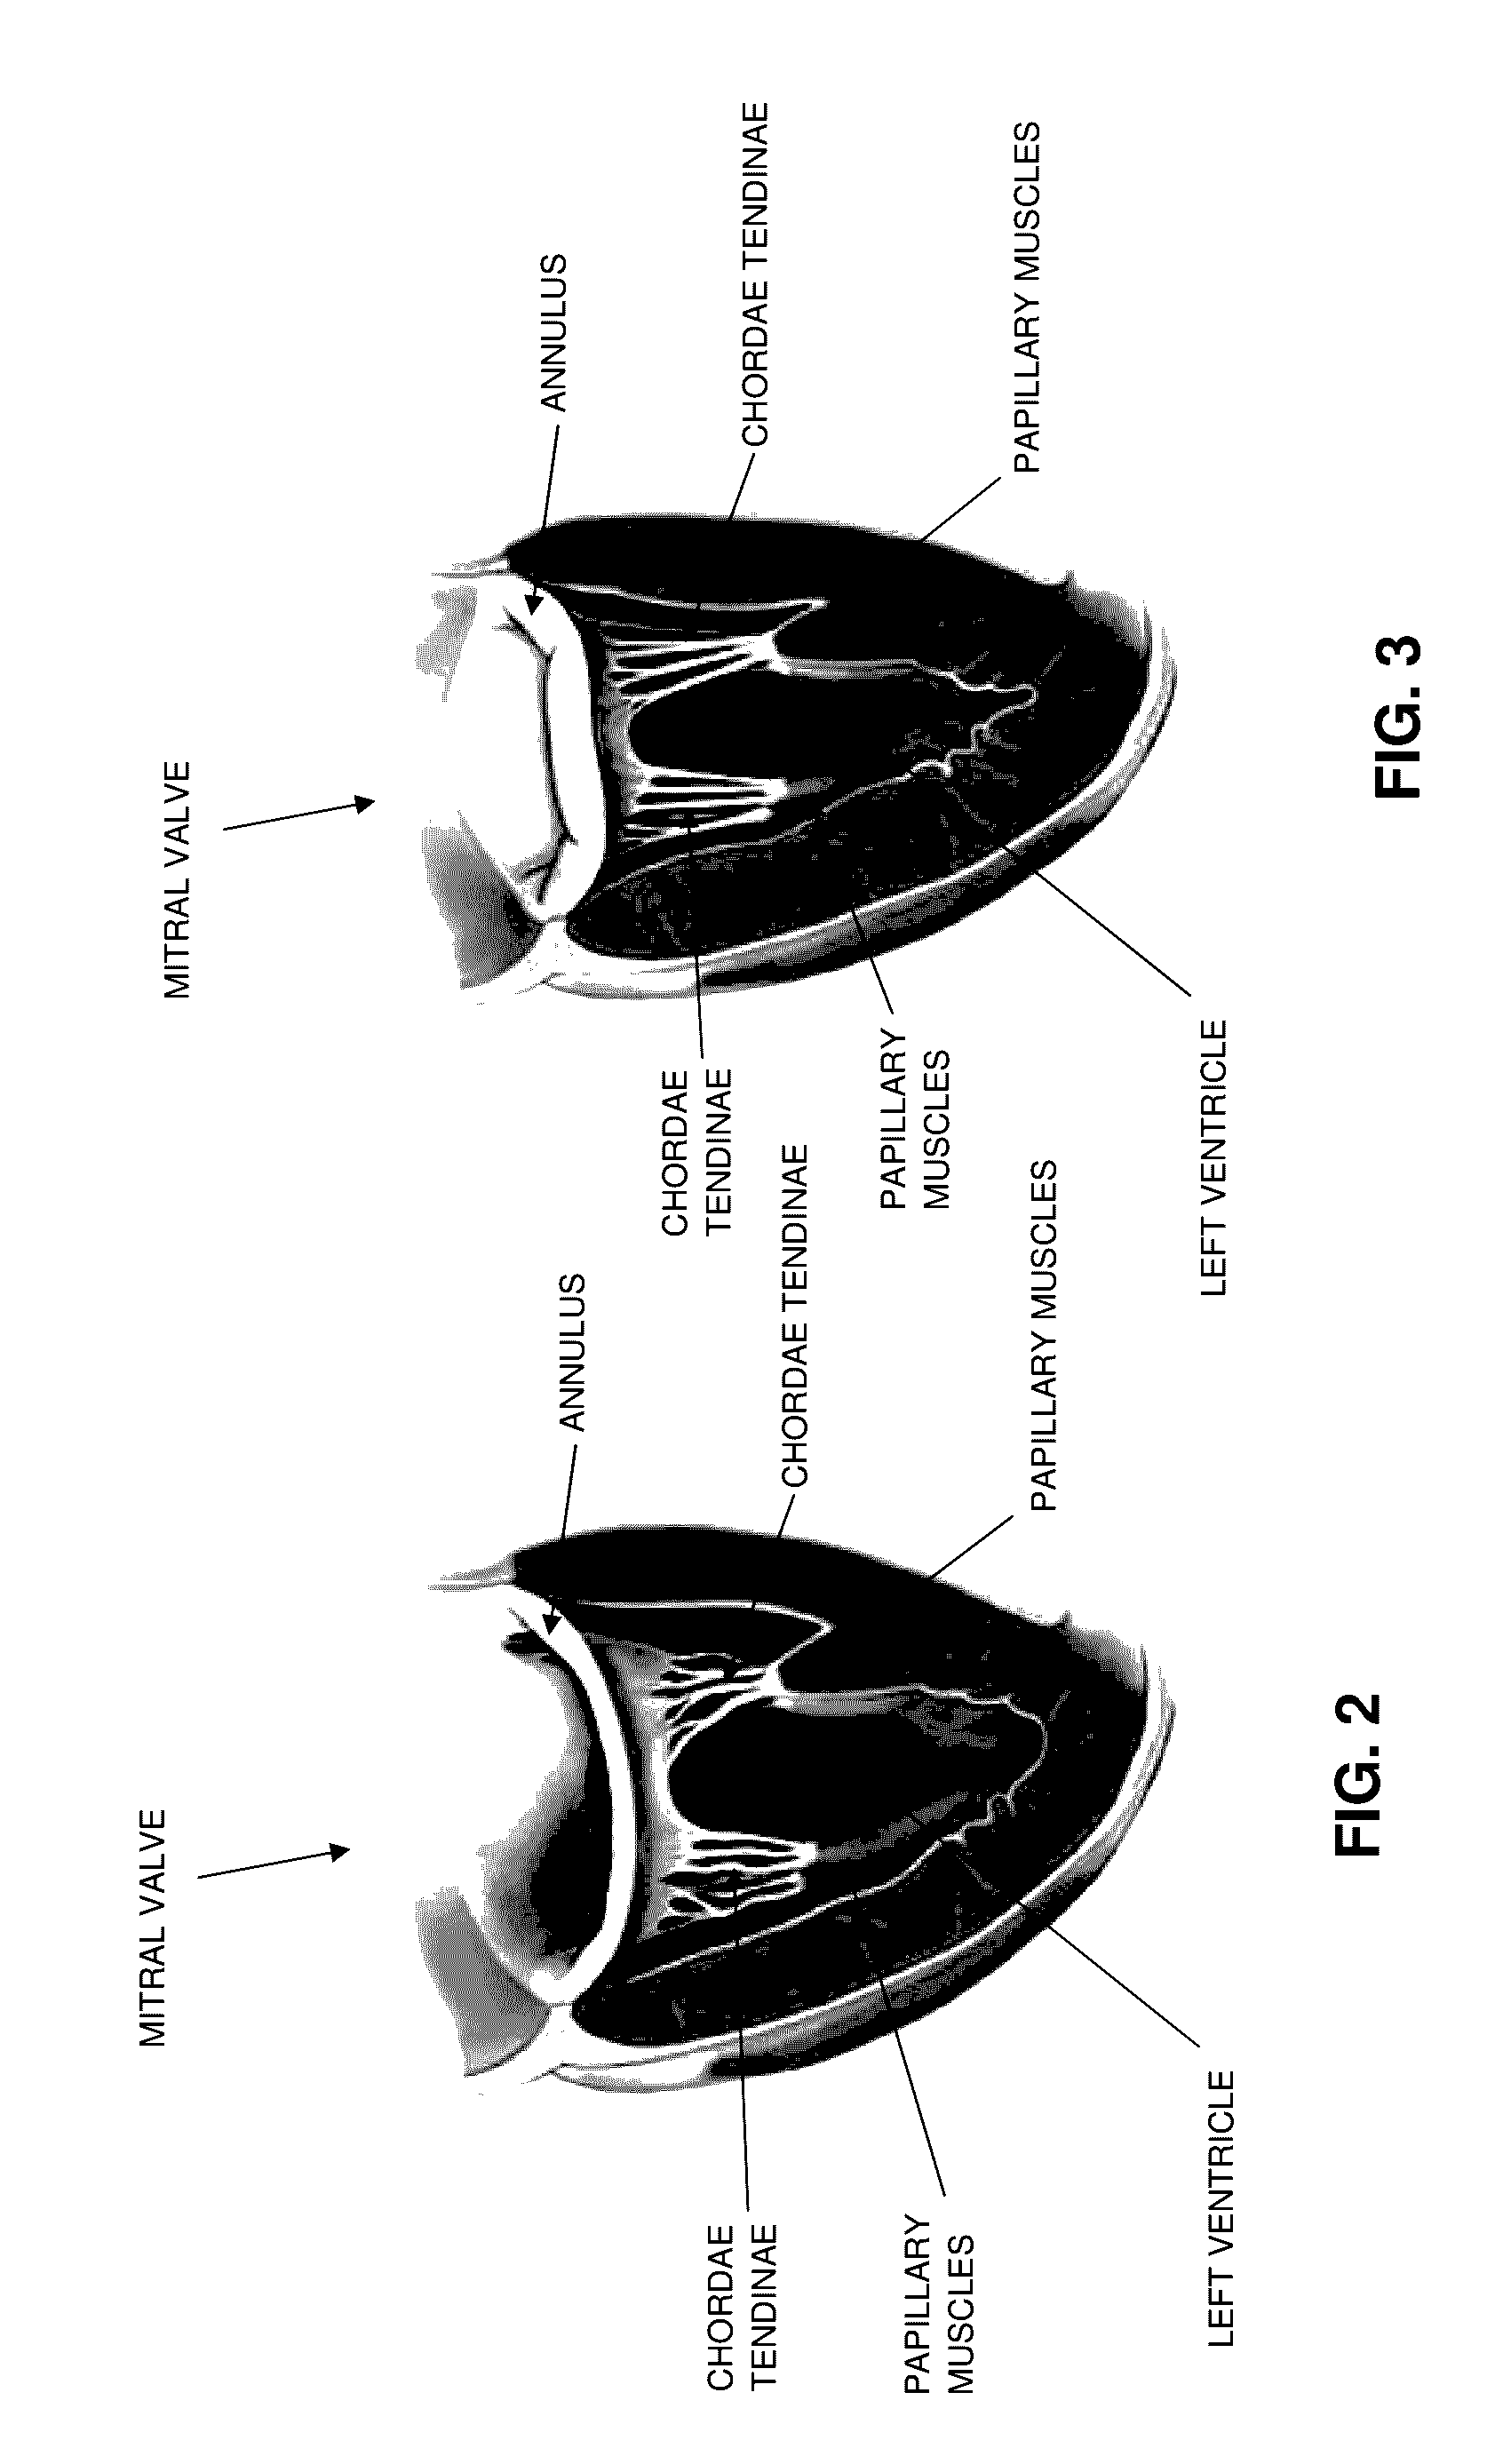 Method and apparatus for repairing a mitral valve